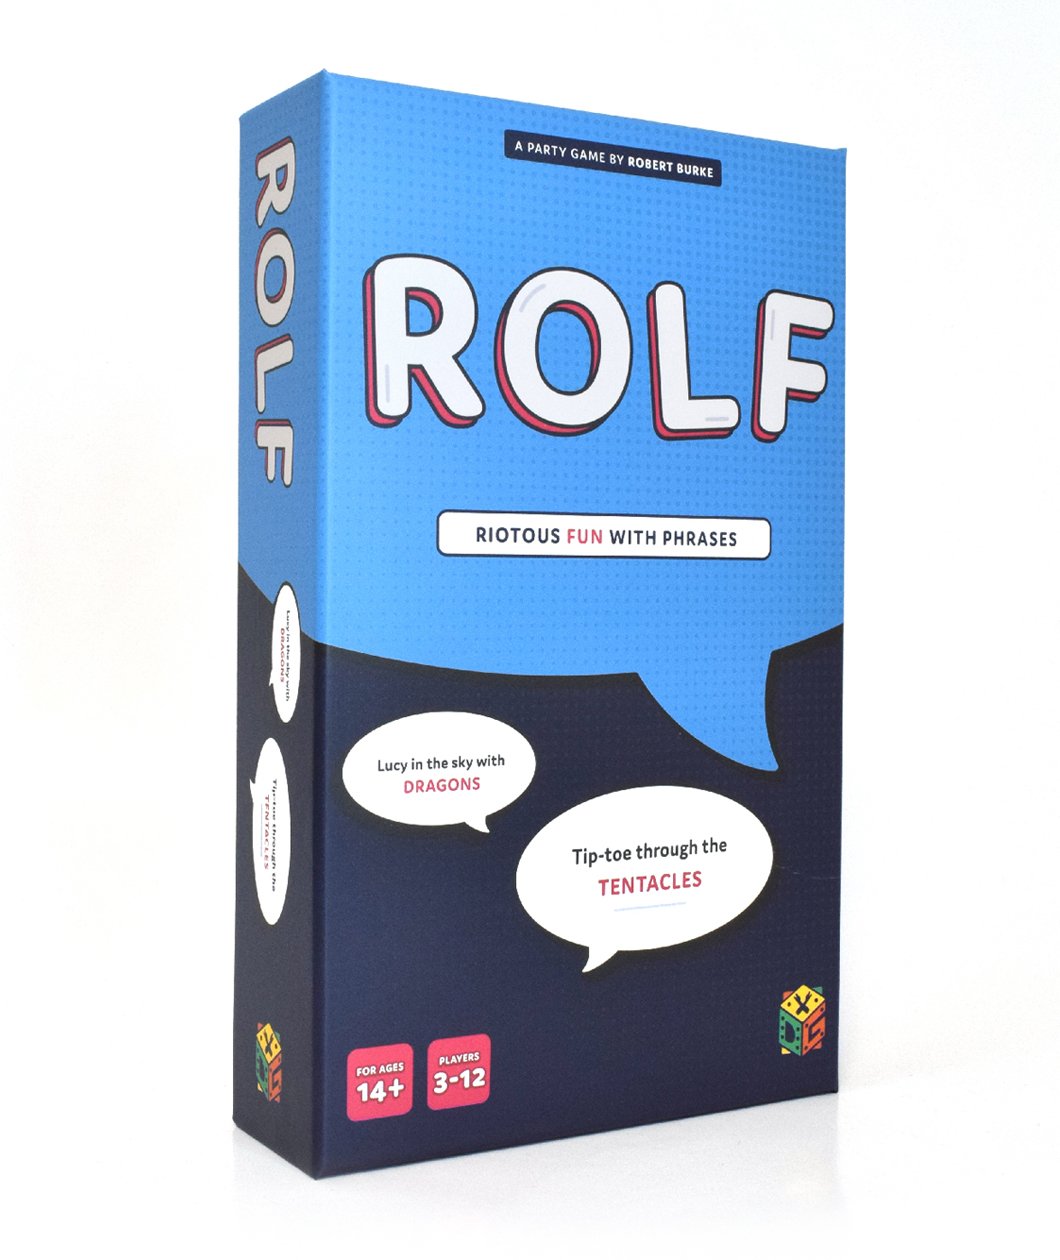 Rolf: Riotous Fun With Phrases!